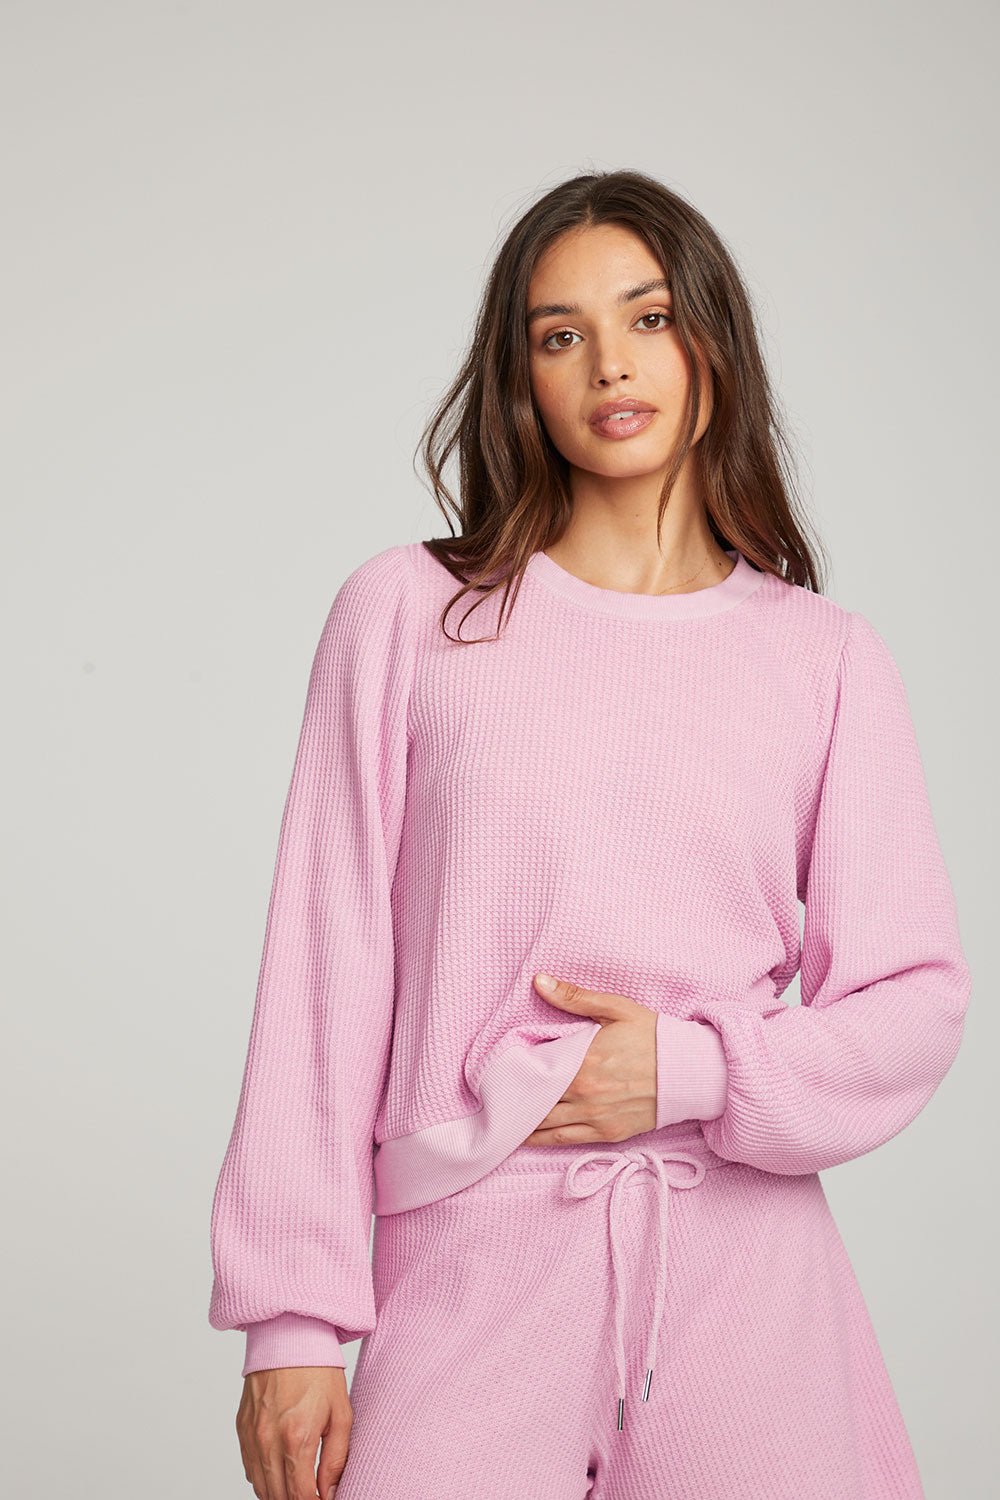 Owlsey Pastel Lavender Pullover WOMENS chaserbrand